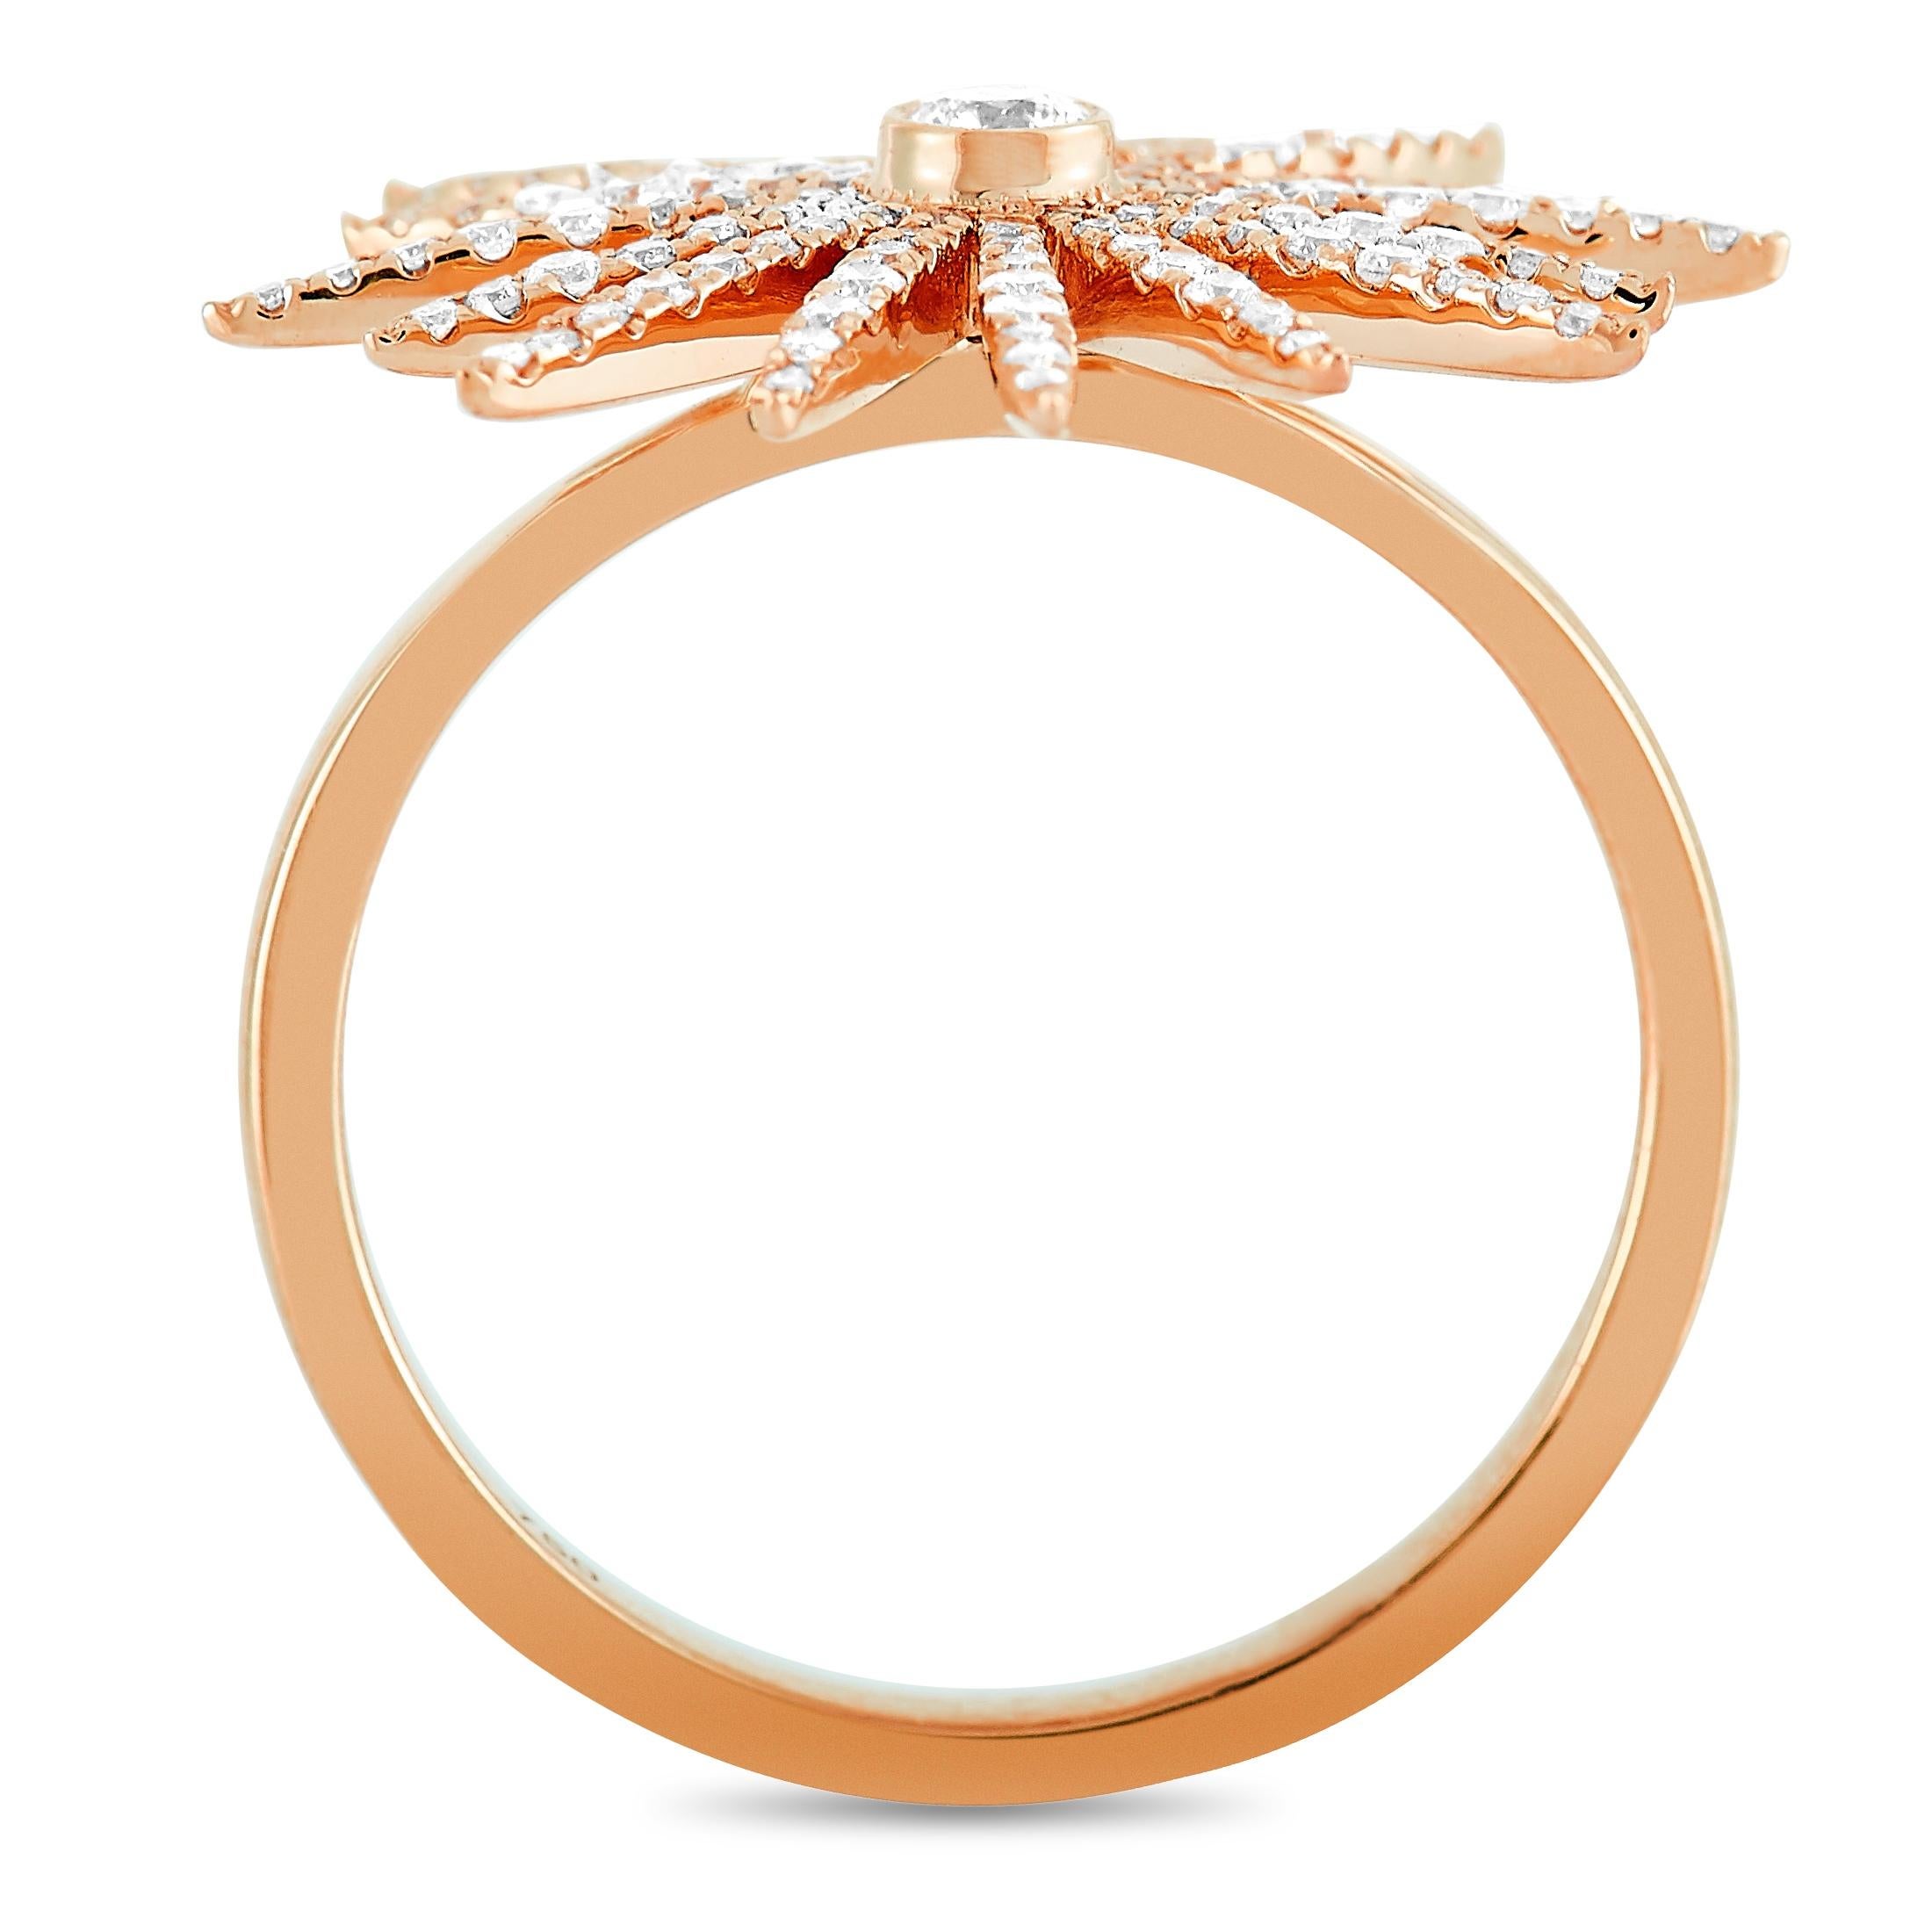 This LB Exclusive ring is made of 18K rose gold and embellished with diamonds that amount to 0.45 carats. The ring weighs 4 grams and boasts band thickness of 2 mm and top height of 4 mm, while top dimensions measure 20 by 20 mm.
 
 Offered in